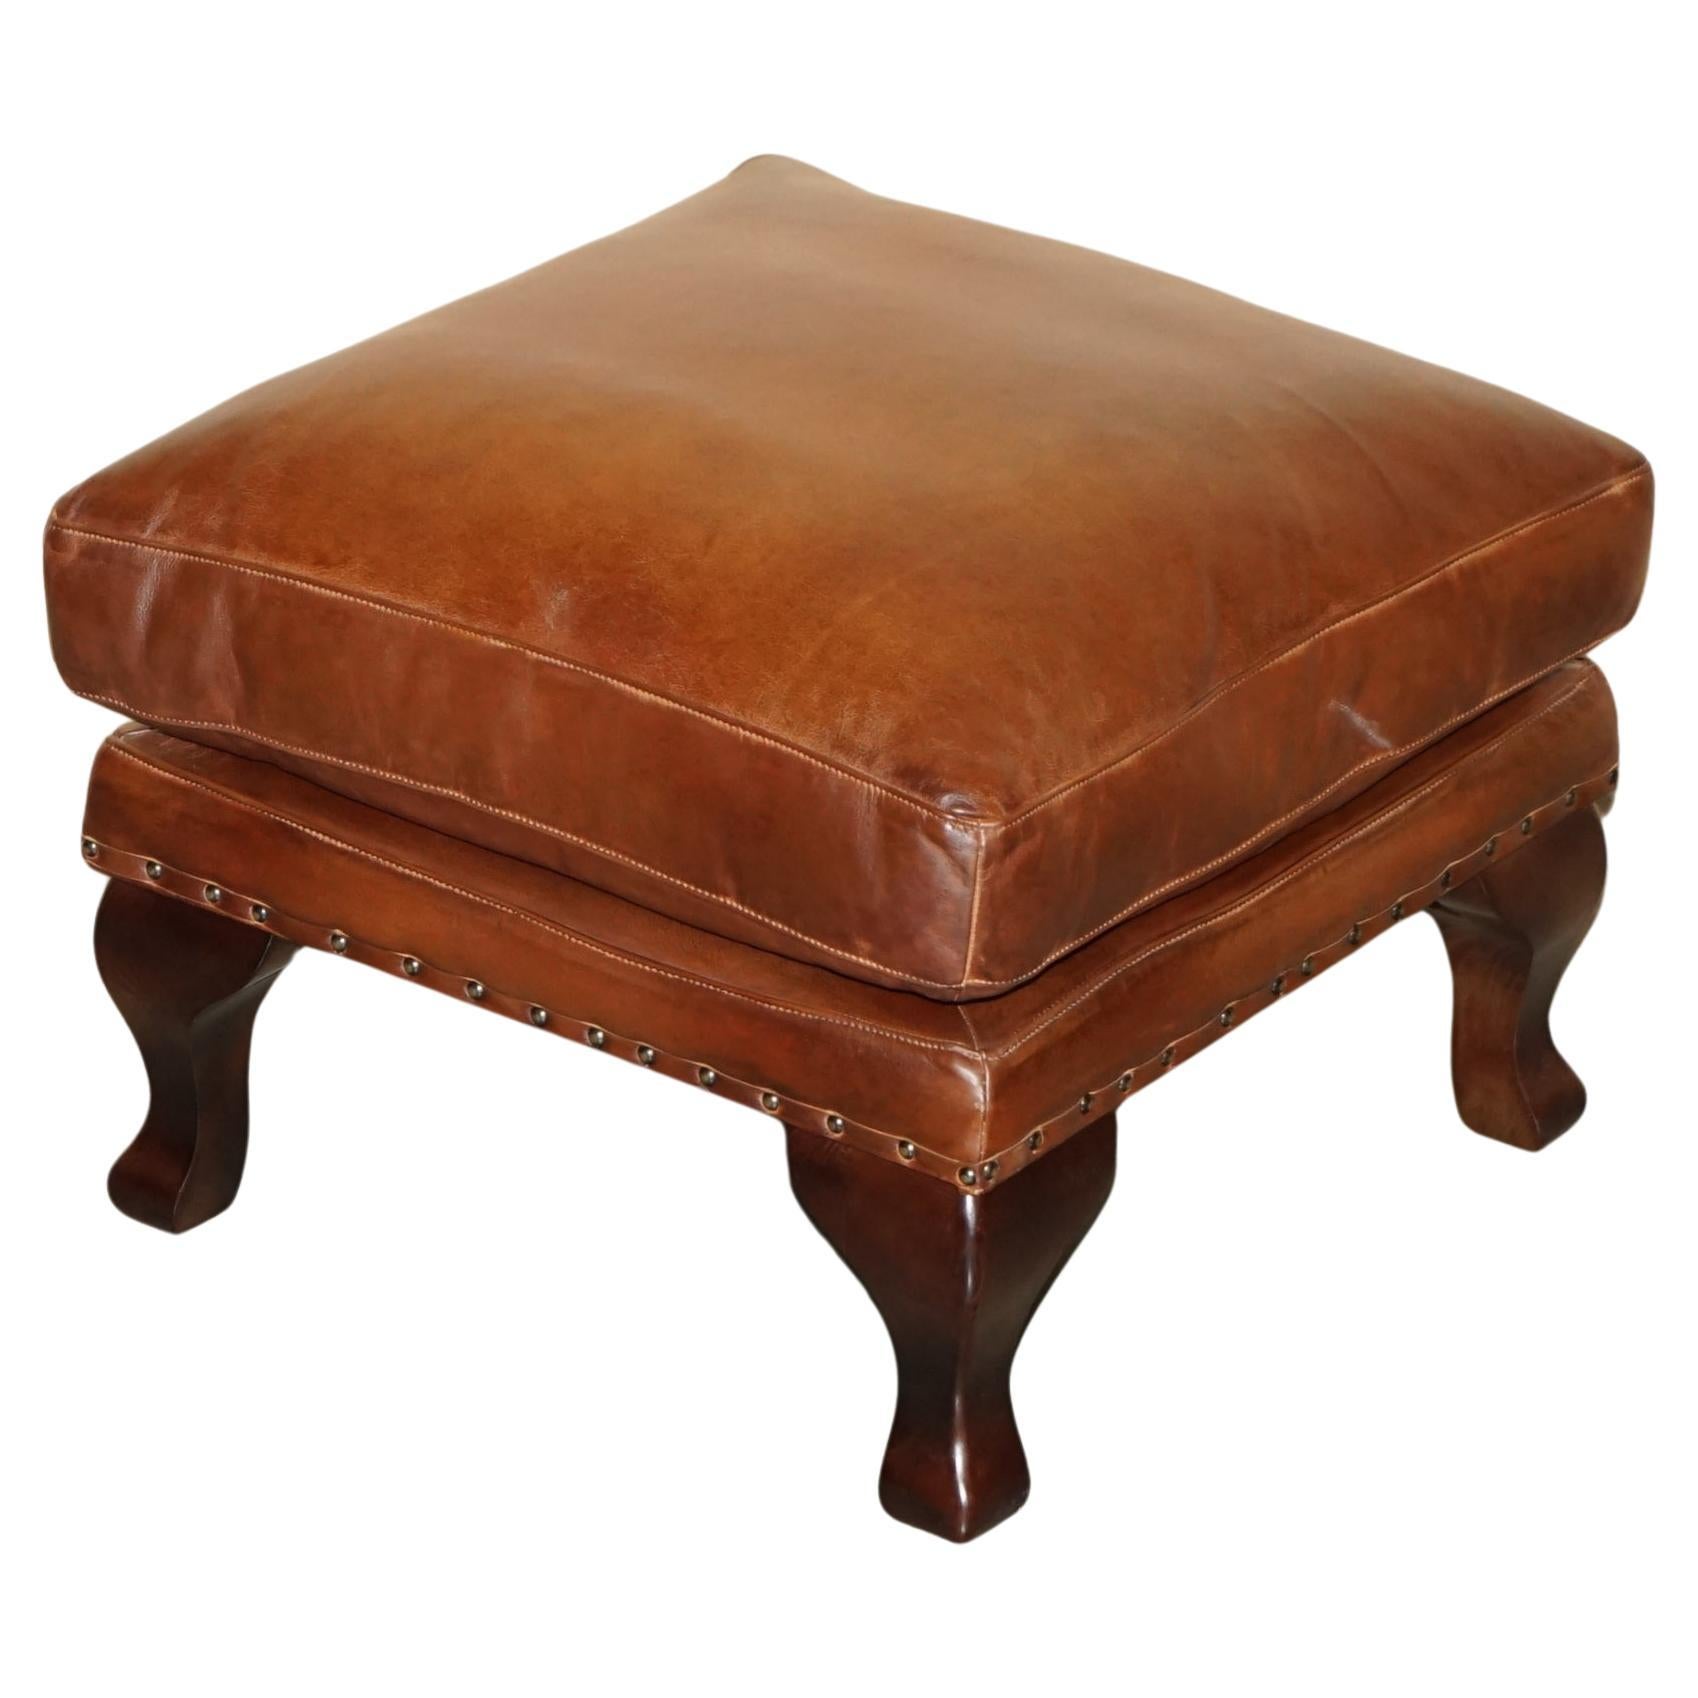 TETRAD BROWN LEATHER LARGE FOOTSTOOL LARGE ENoUGH FOR TWO PEOPLE TO SHARE im Angebot